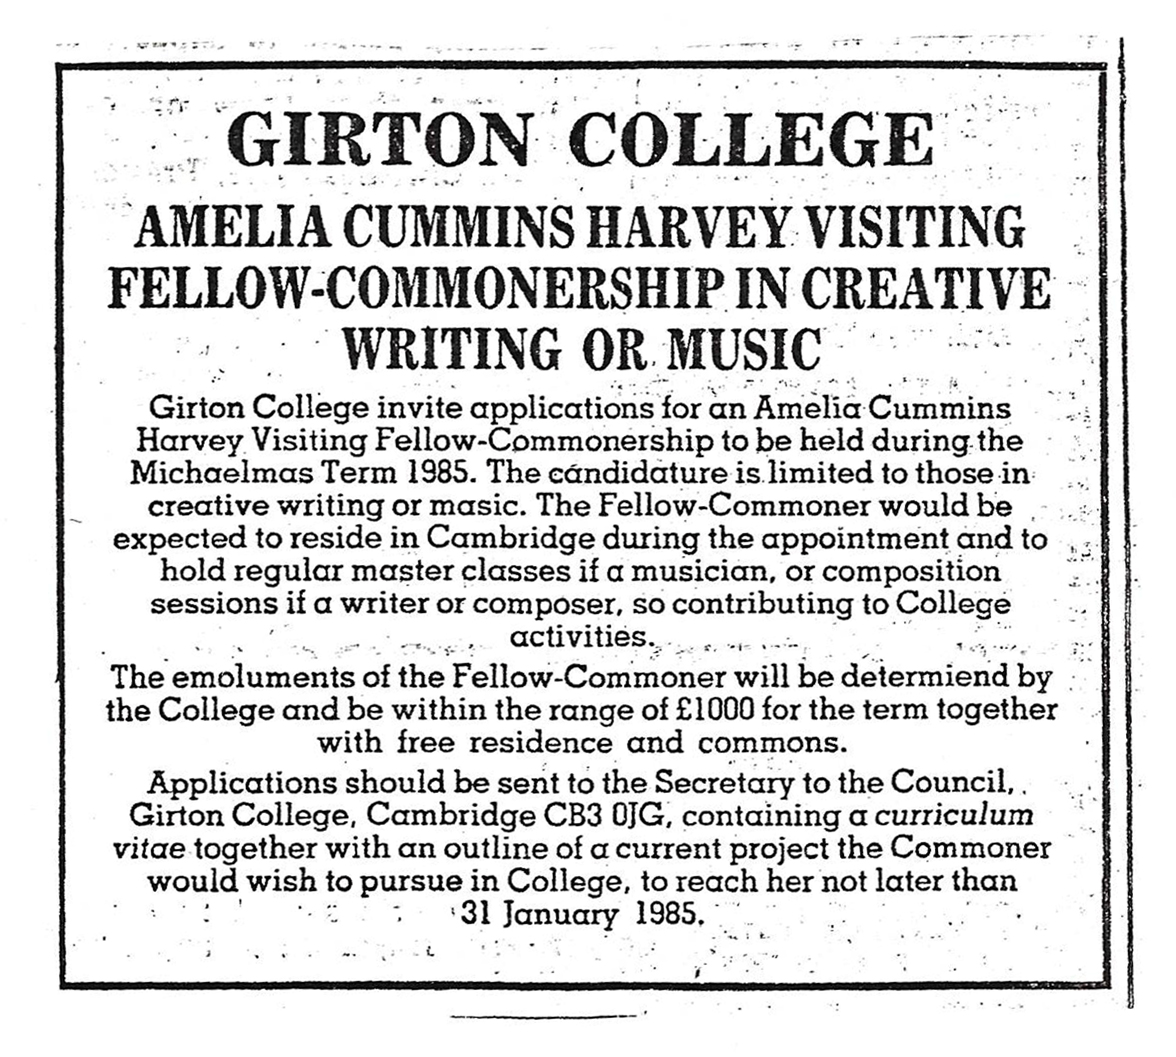 Advertisement for the Mary Amelia Cummins Harvey Visiting Fellow Commonership in the Creative Arts or Music, which appeared in the Guardian, January 1985 (archive reference: GCAR 2/6/84 pt)